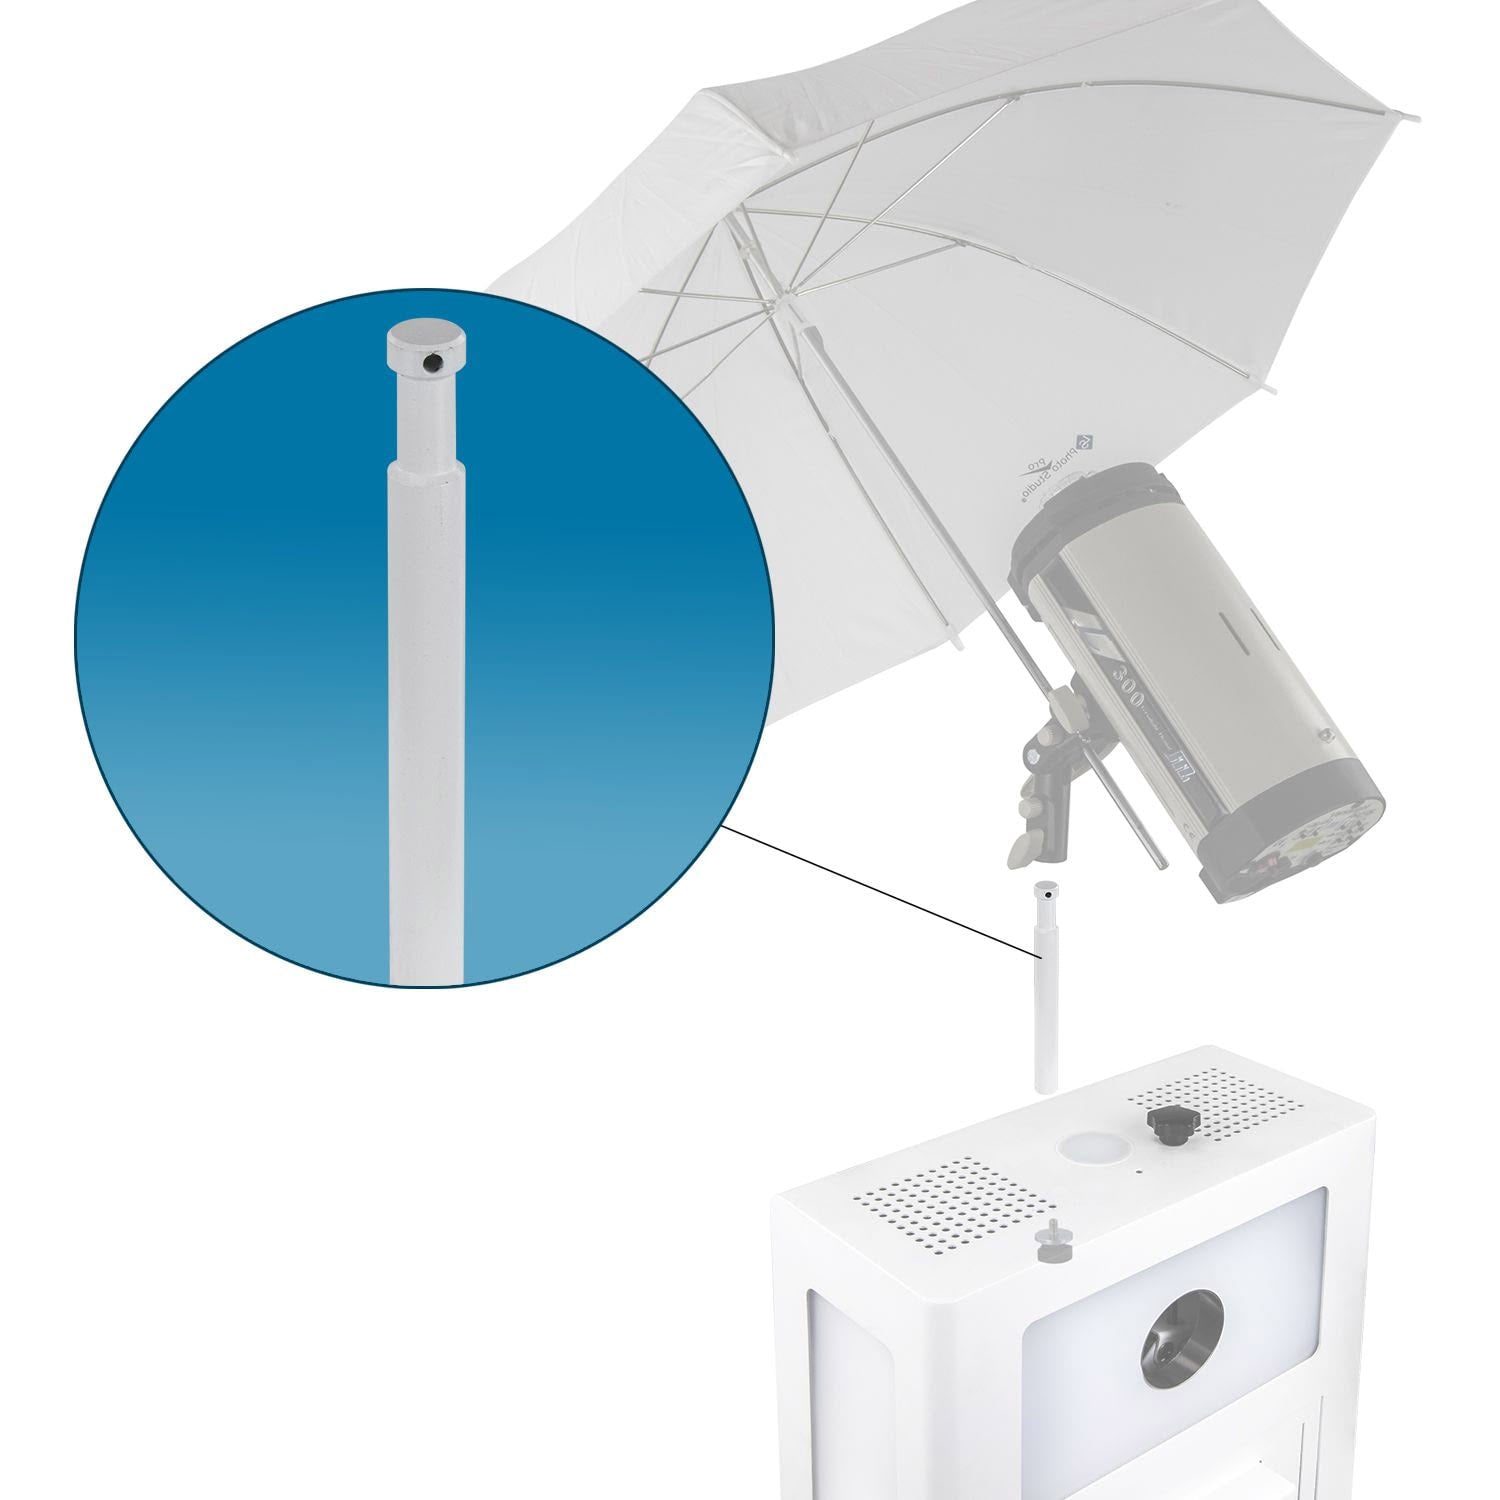 B-Stock: Odyssey PBBABYPIN9WHT, Long 5/8″ Baby Pin Majestic Photo Booth Mount - 9'', White by Odyssey